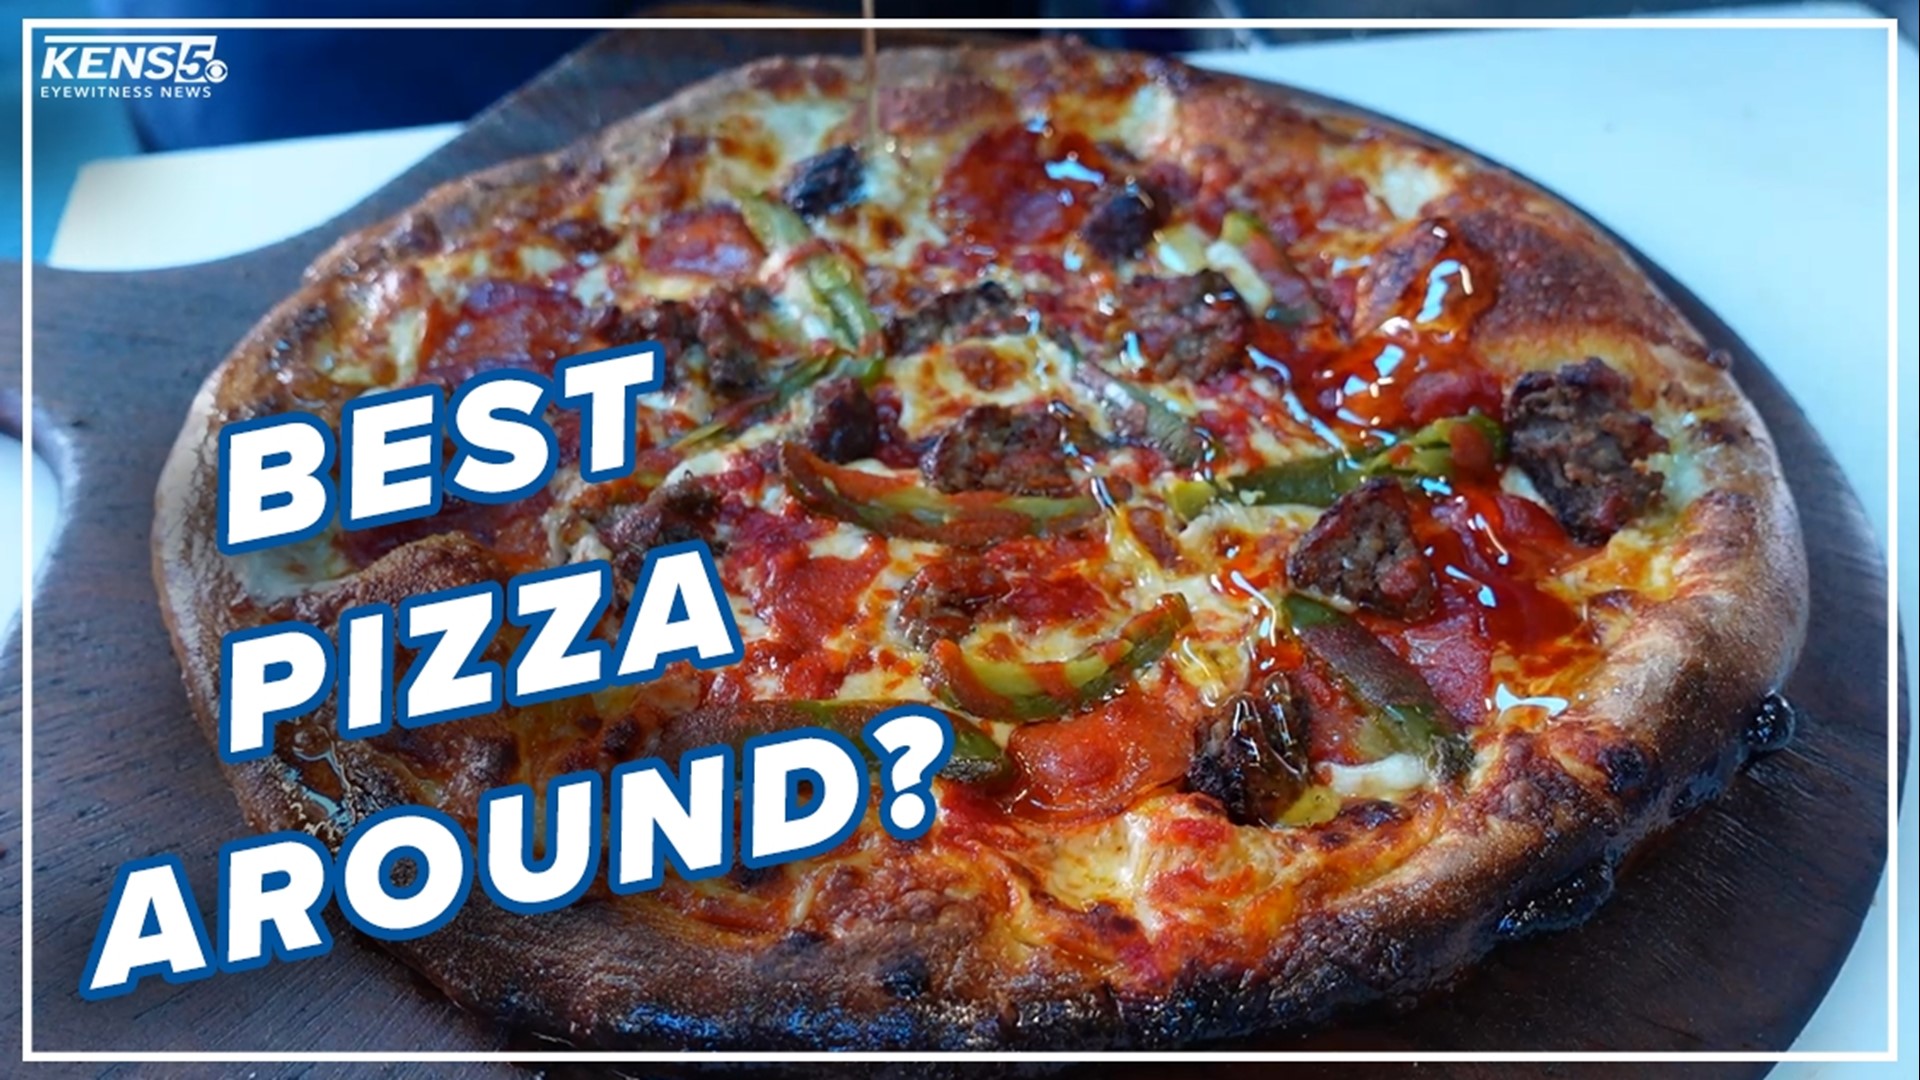 Their pizza has certain seasonings to it that are similar to what you'll find in some Texas barbecue and cooking styles.